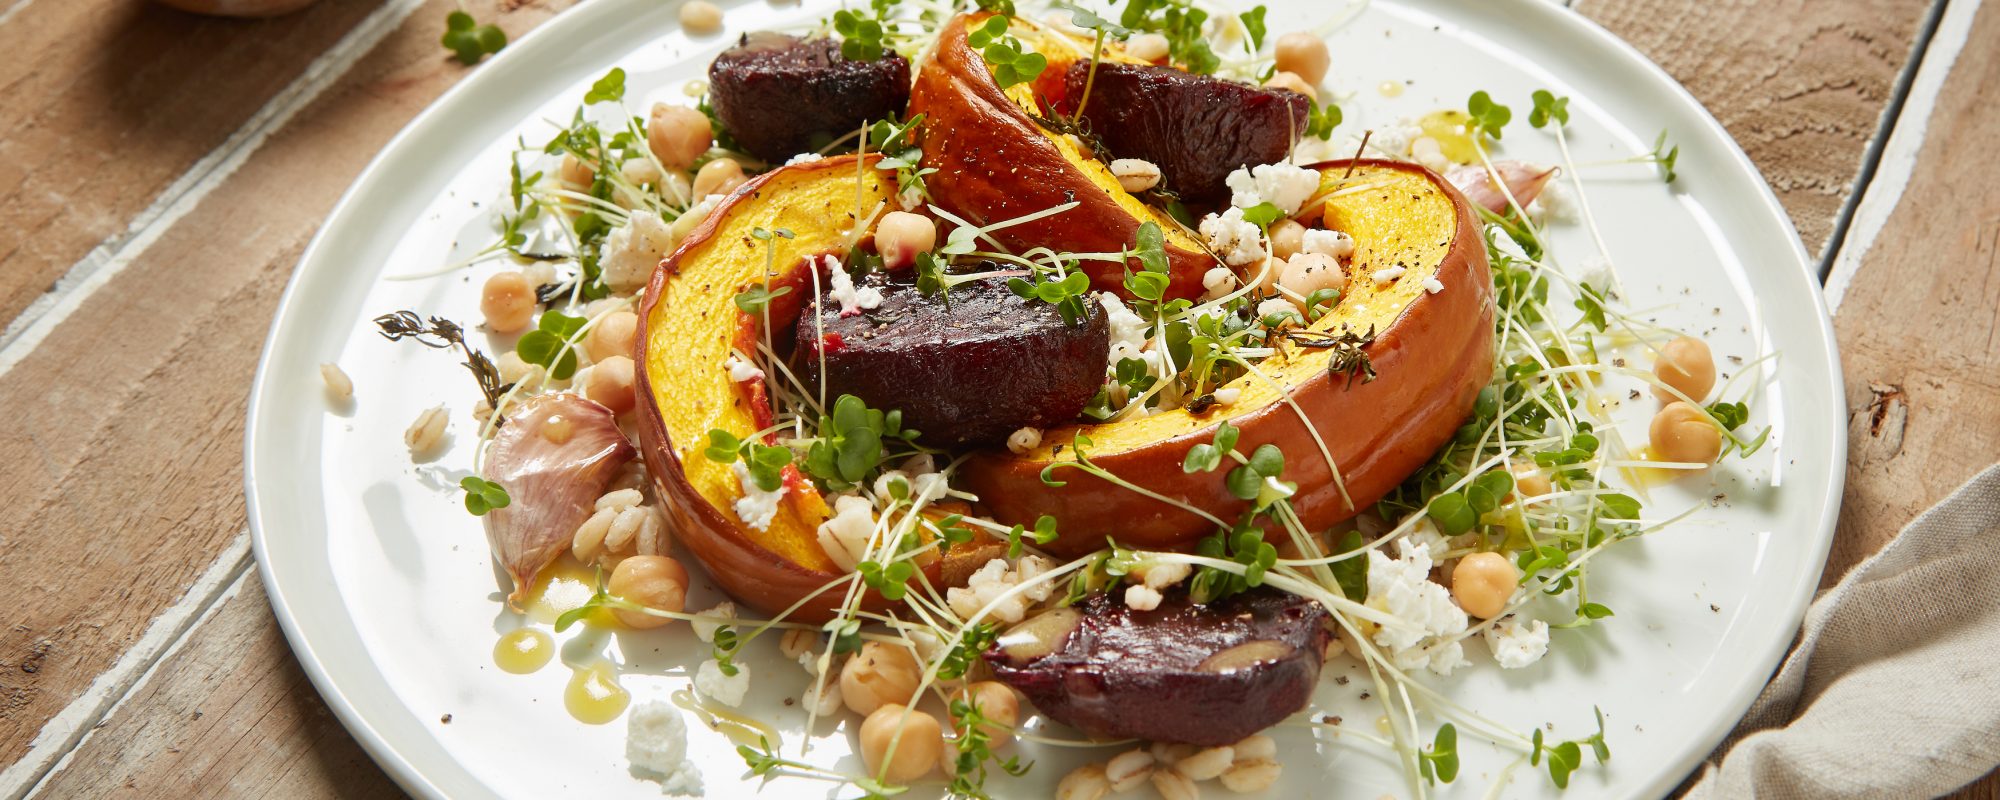 Pumpkin and beetroot salad with goats cheese and cress